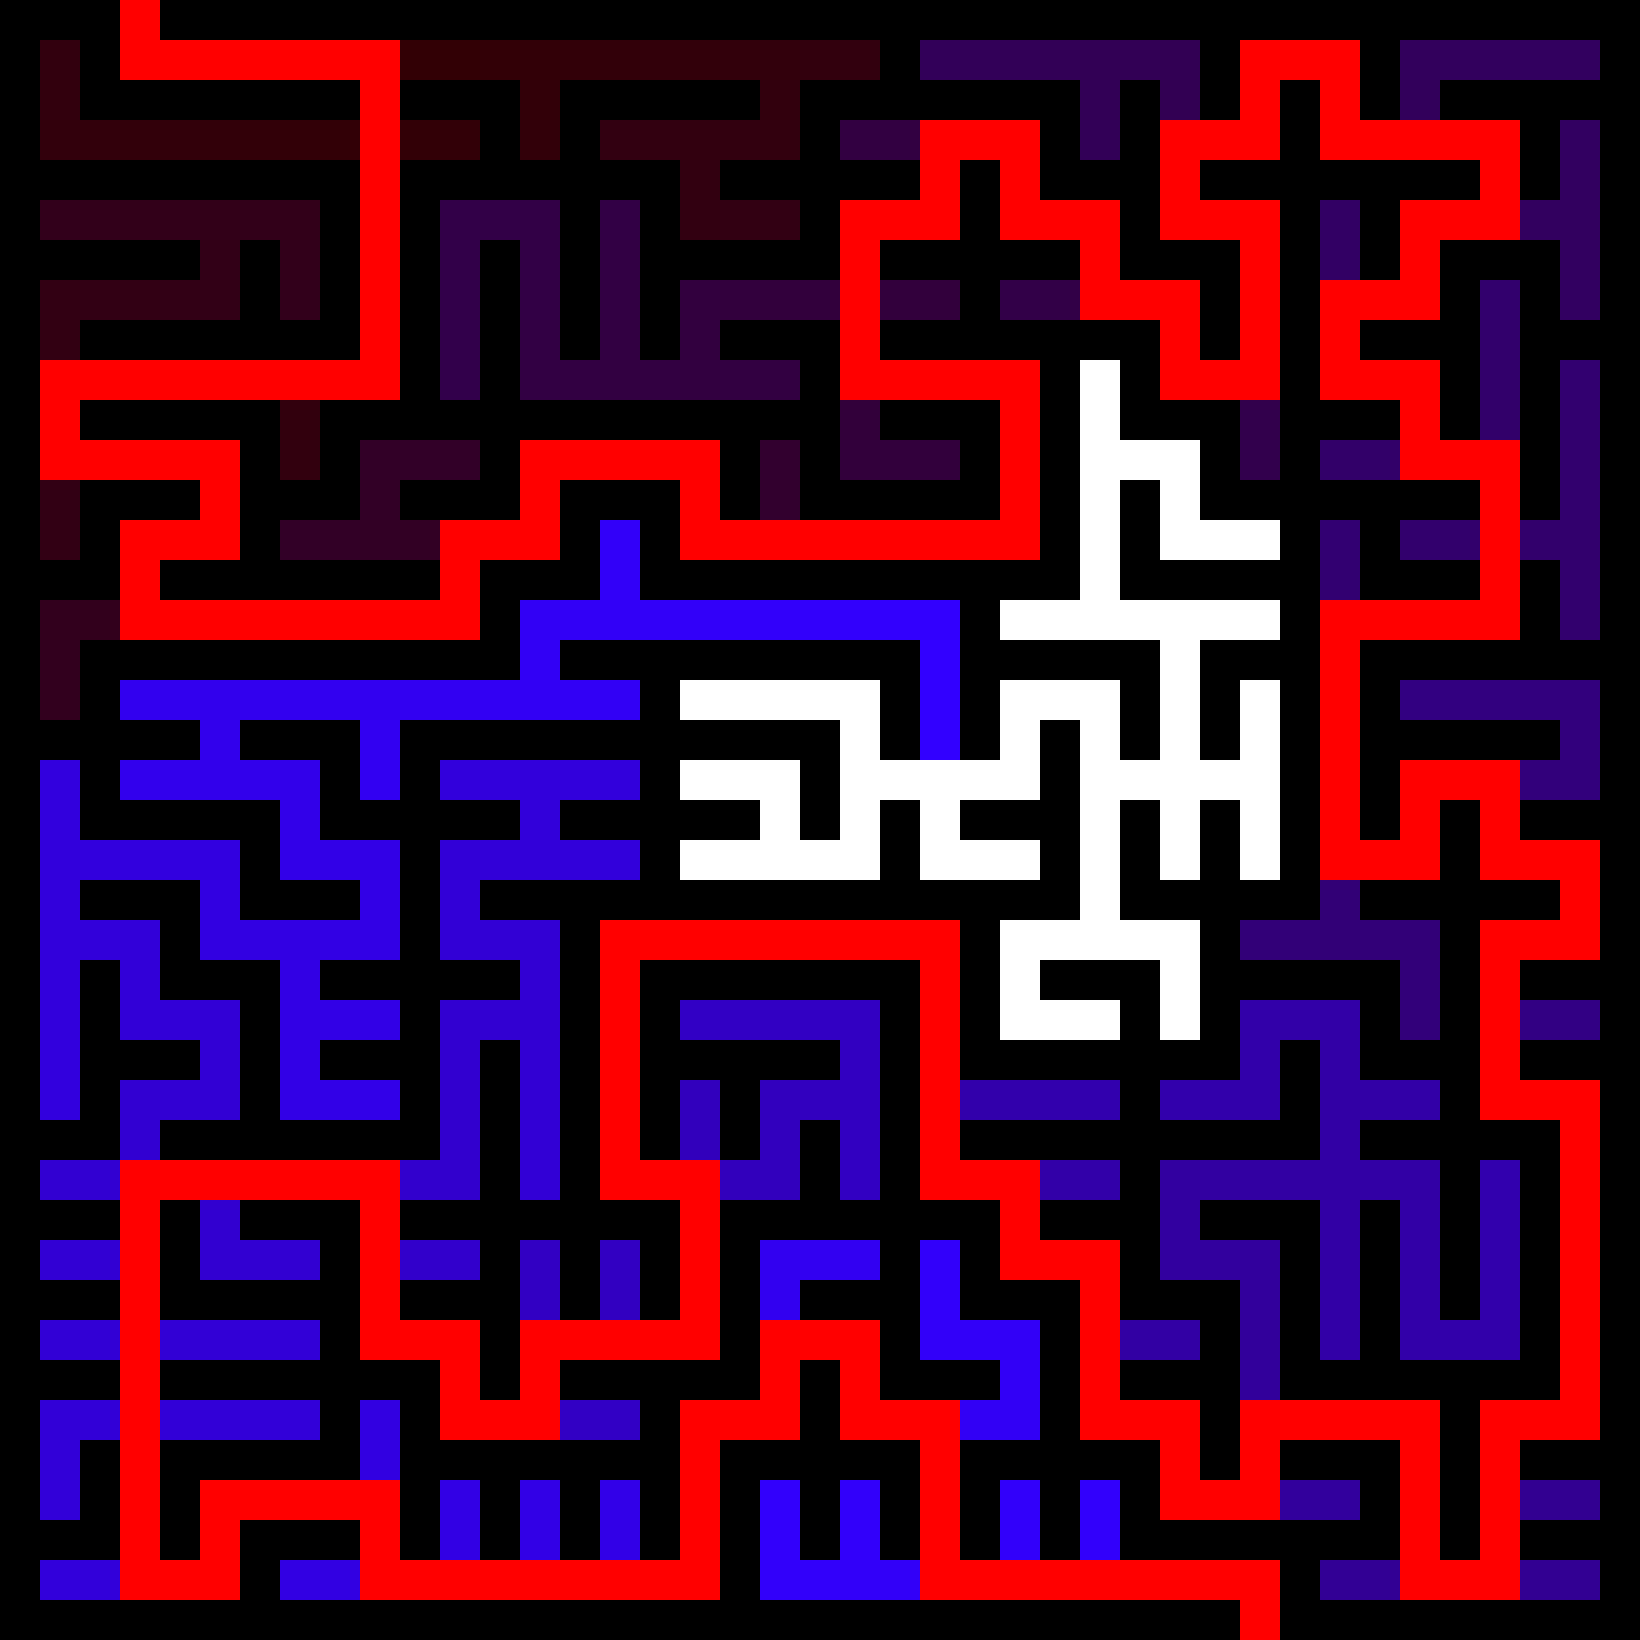 second-anniversary_post-161_maze-solving_normal_solved_enlarged.png